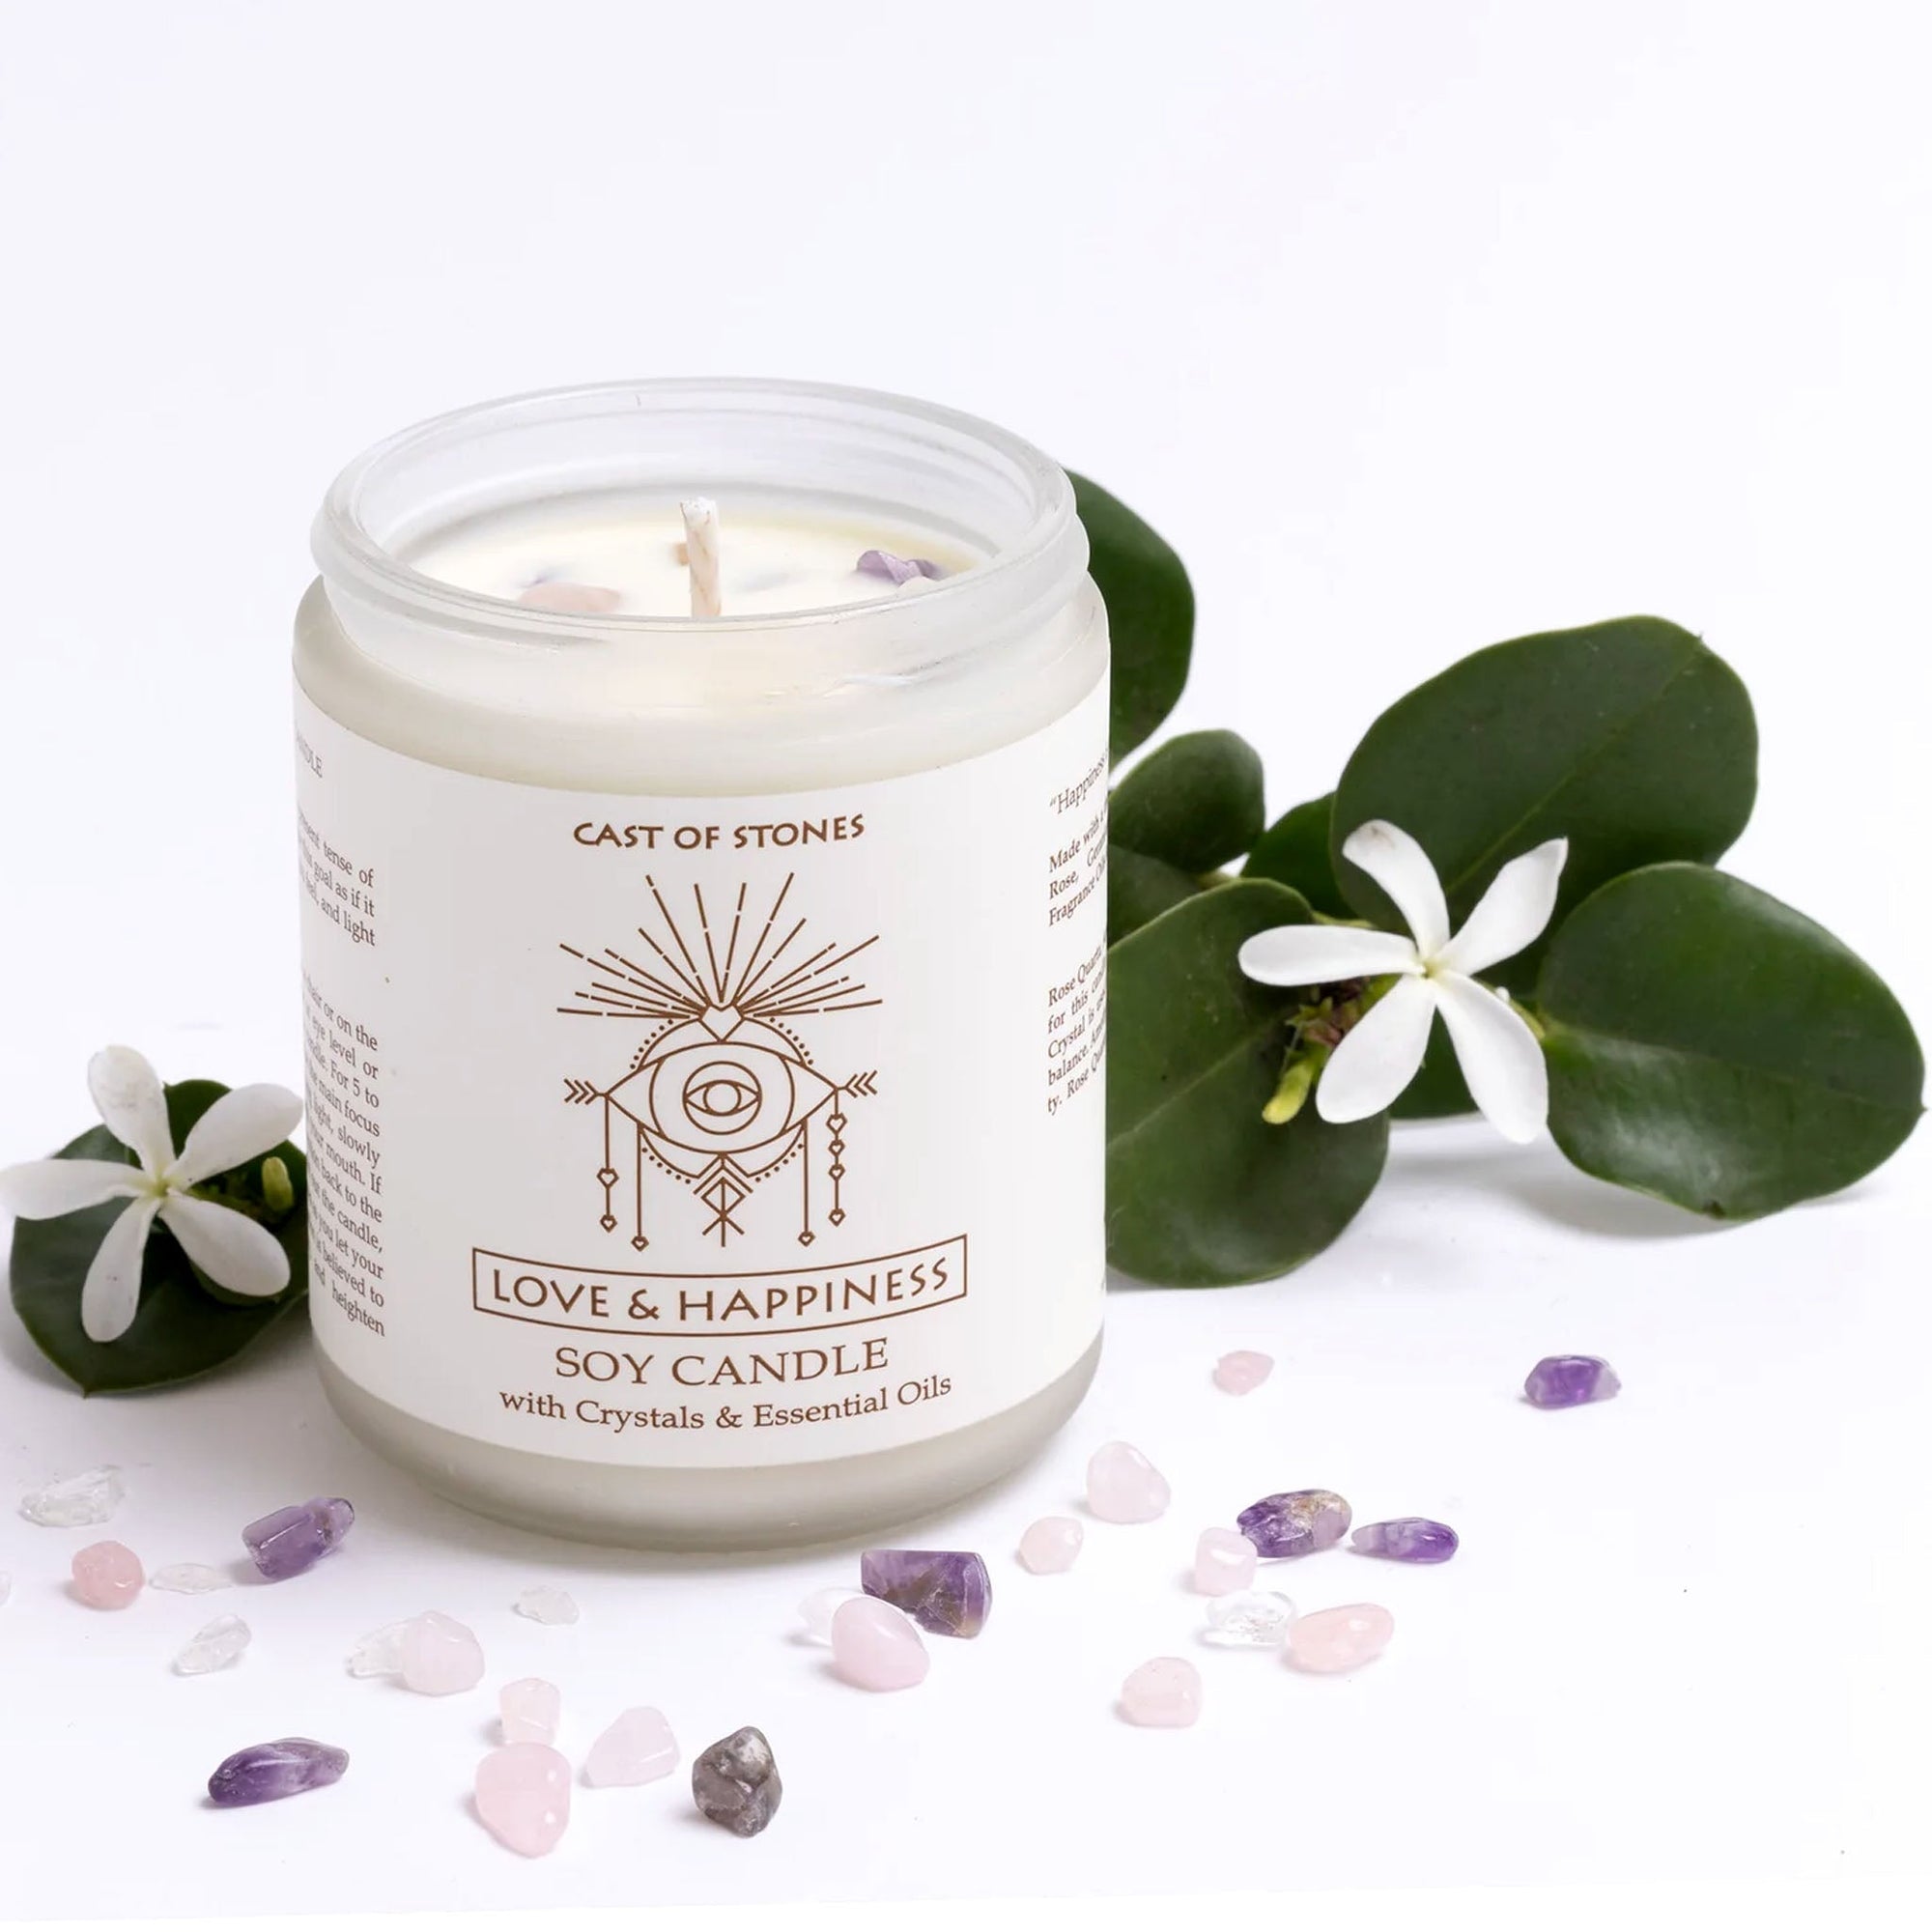 Love & Happiness Candle with Crystals